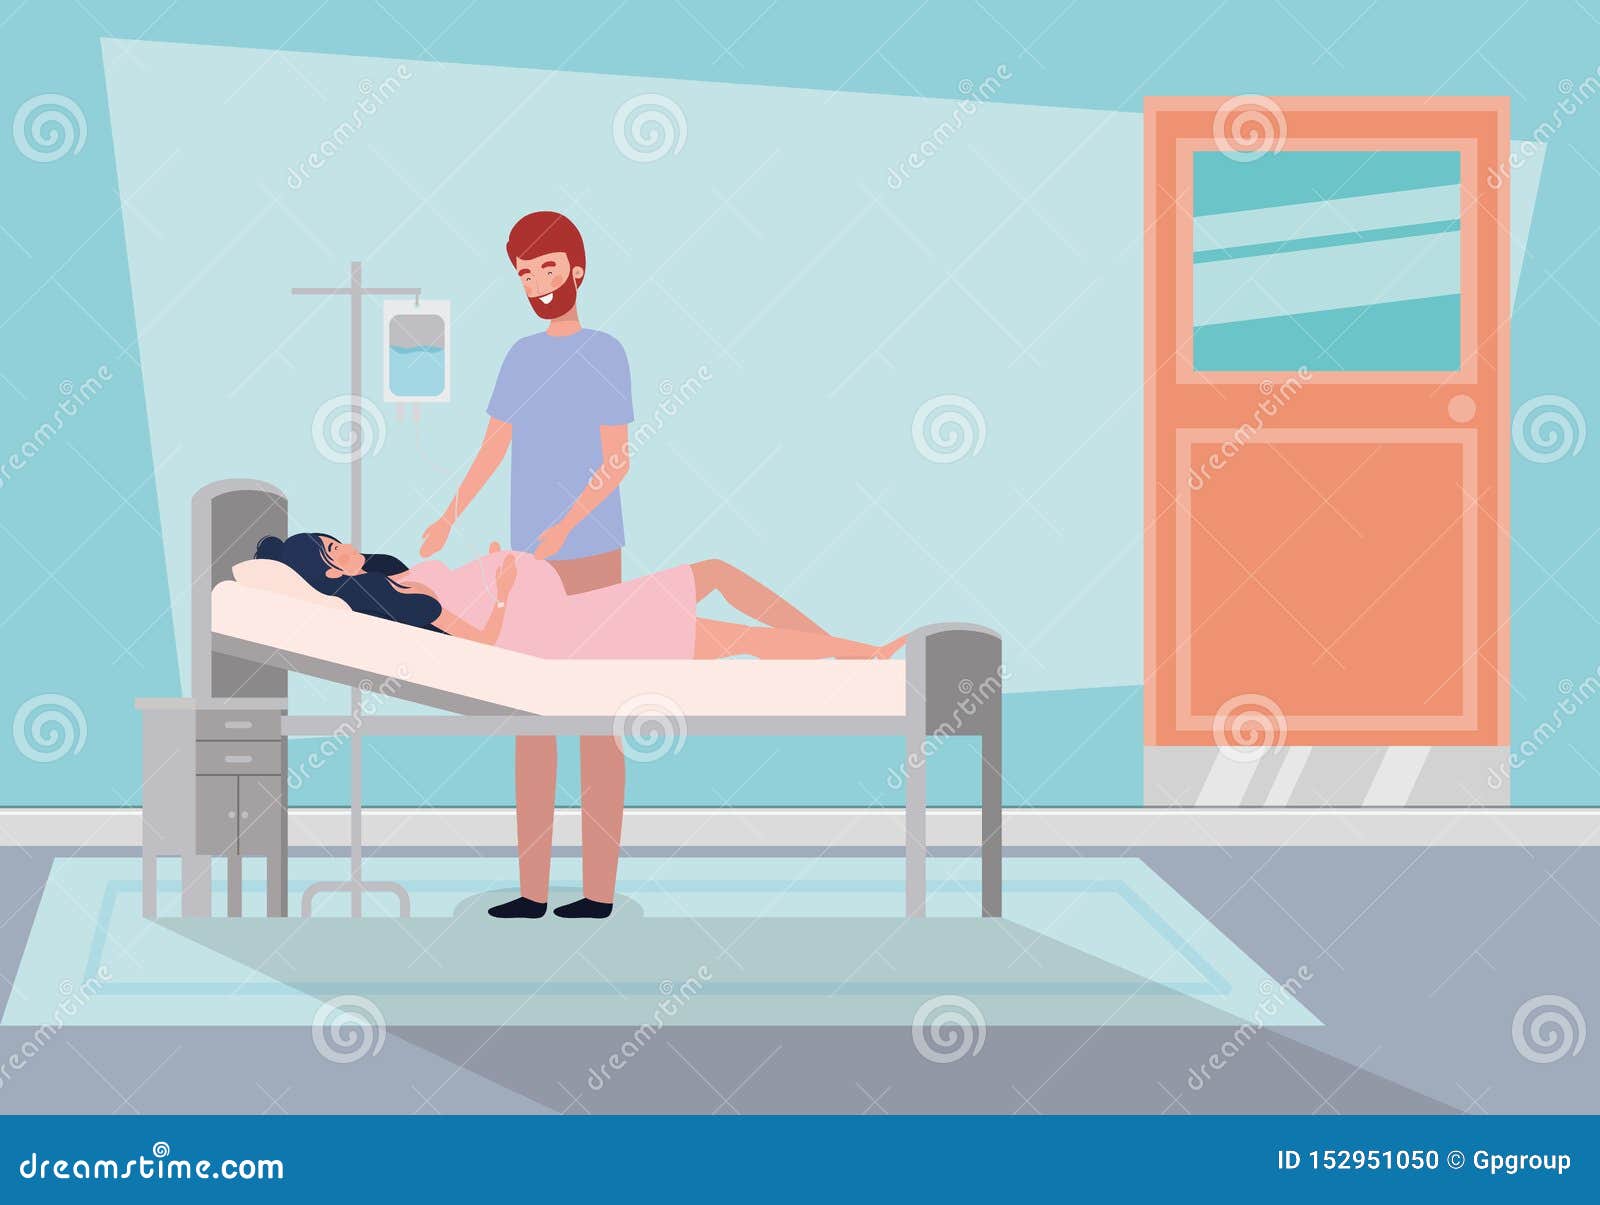 Man with Pregnancy Woman in Hospital Room Stock Vector - Illustration ...